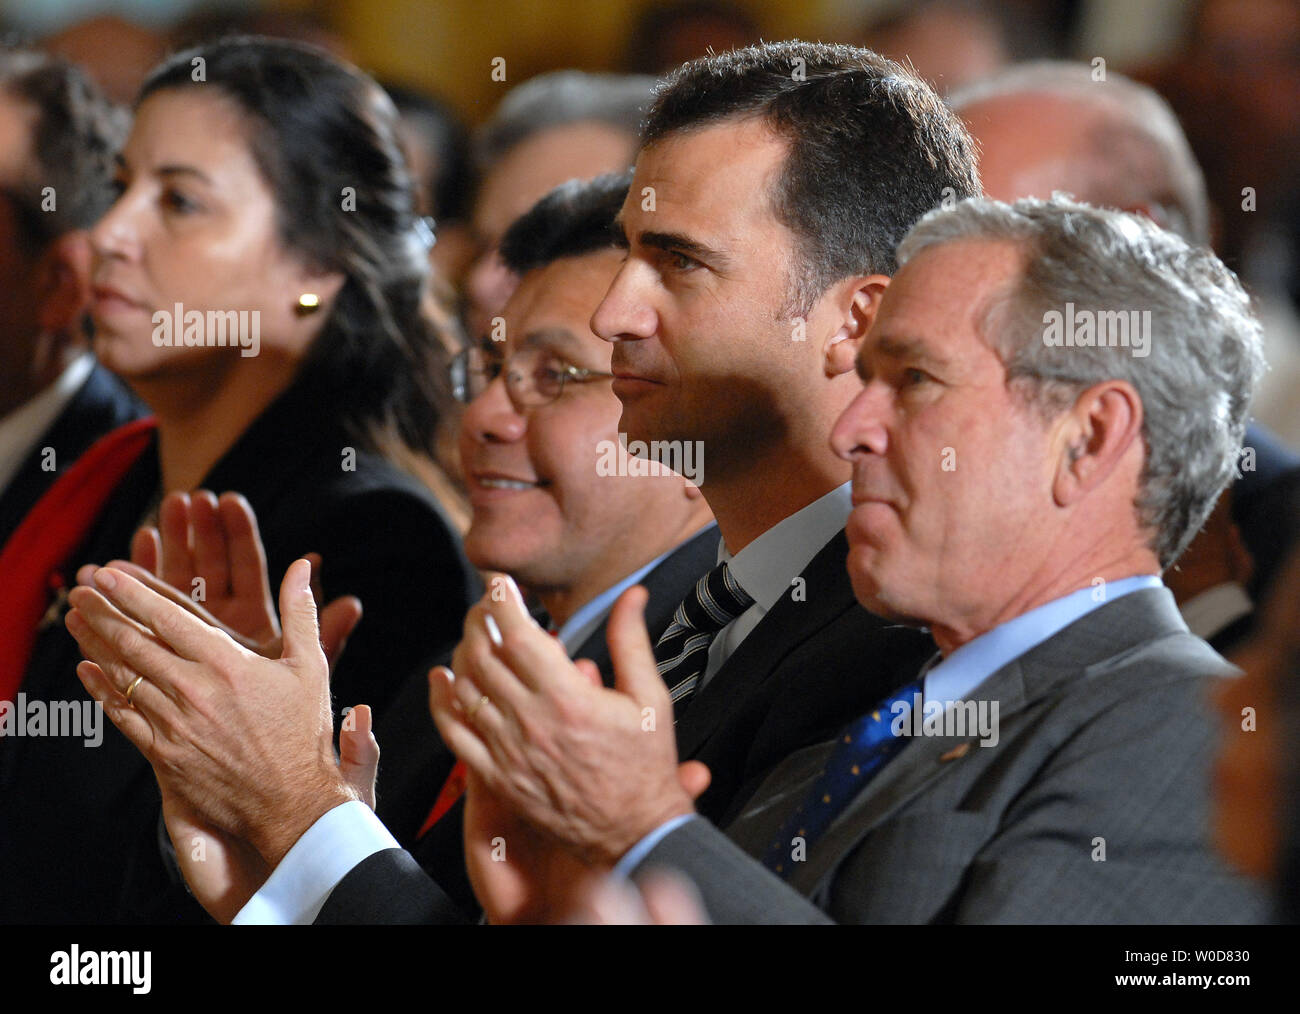 Spanish Crown Prince Felipe (C) joins Attorney General Alberto Gonzales (L) and U.S. President George W. Bush in a celebration of Hispanic Heritage Month in the East Room of the White House on October 6, 2006.   (UPI Photo/Roger L. Wollenberg) Stock Photo